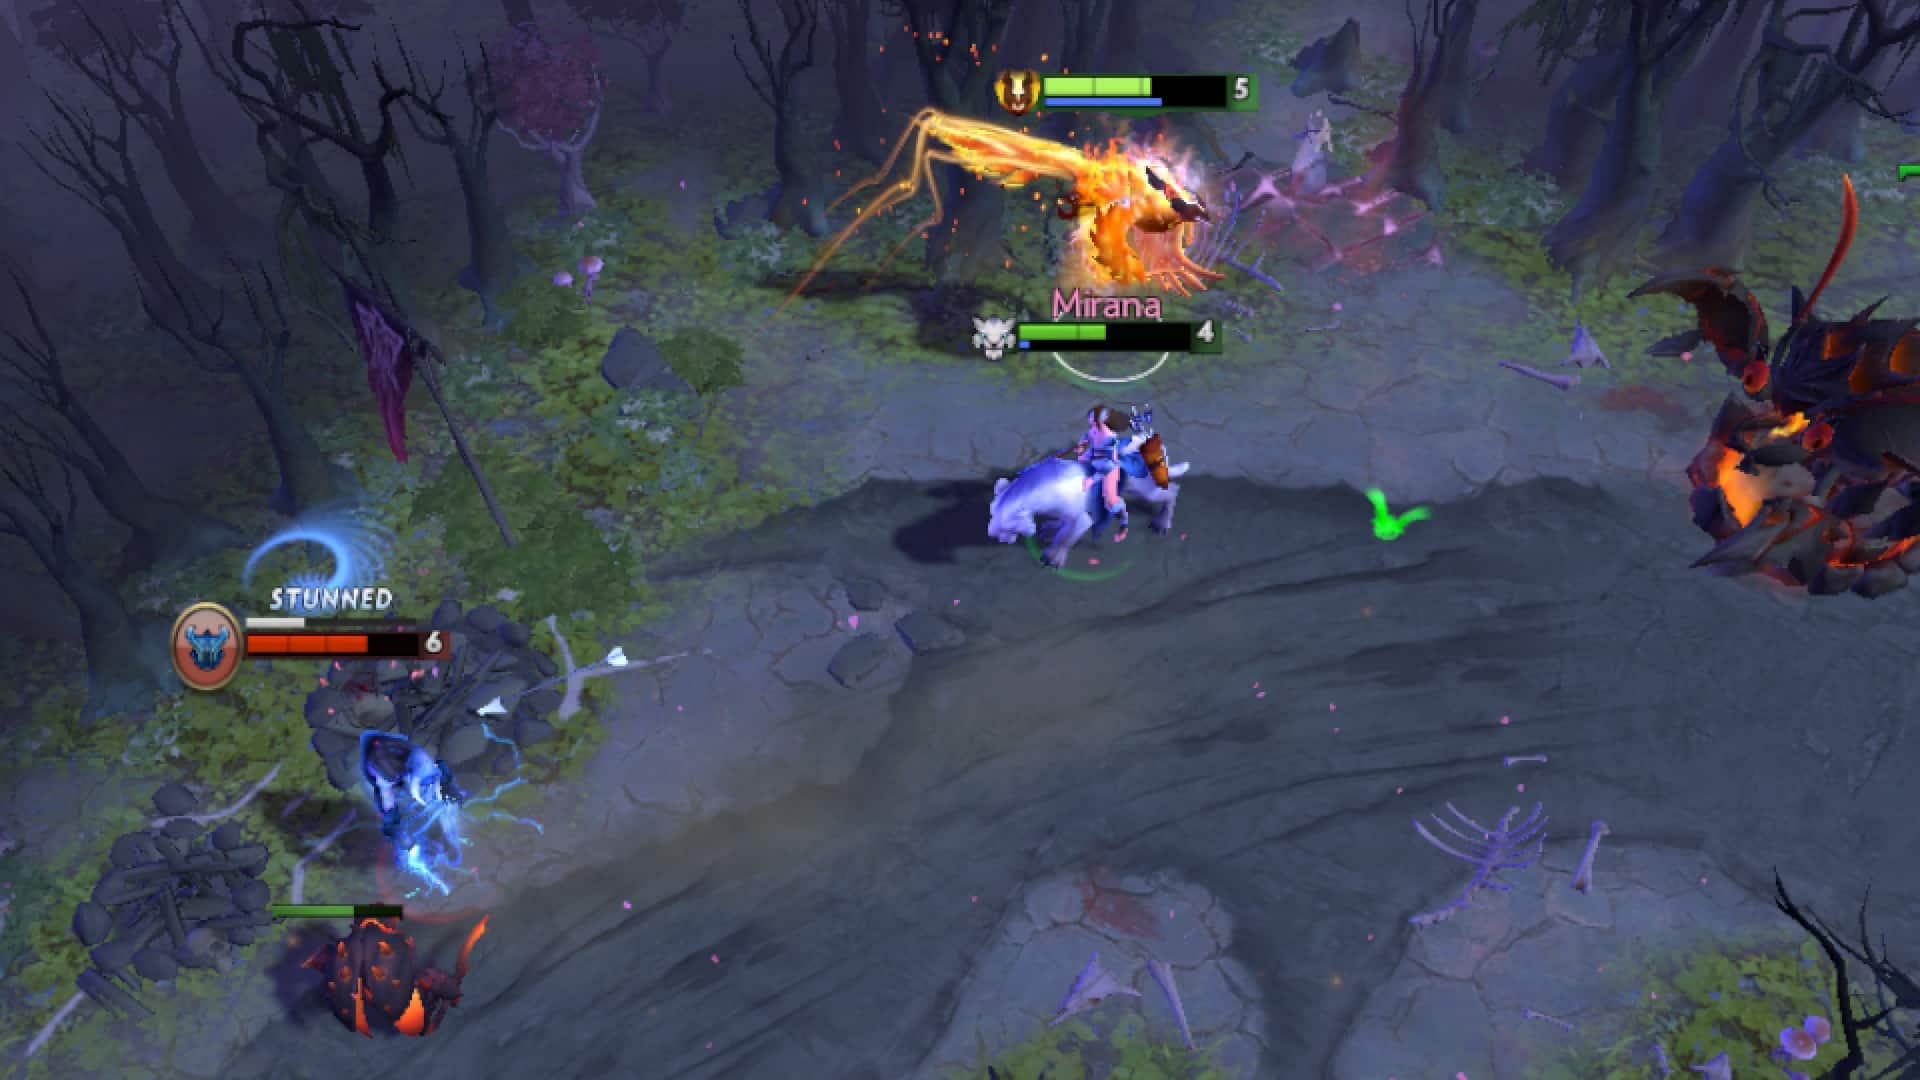 Mirana stuns an enemy heroes to ambush him with Phoenix in her team